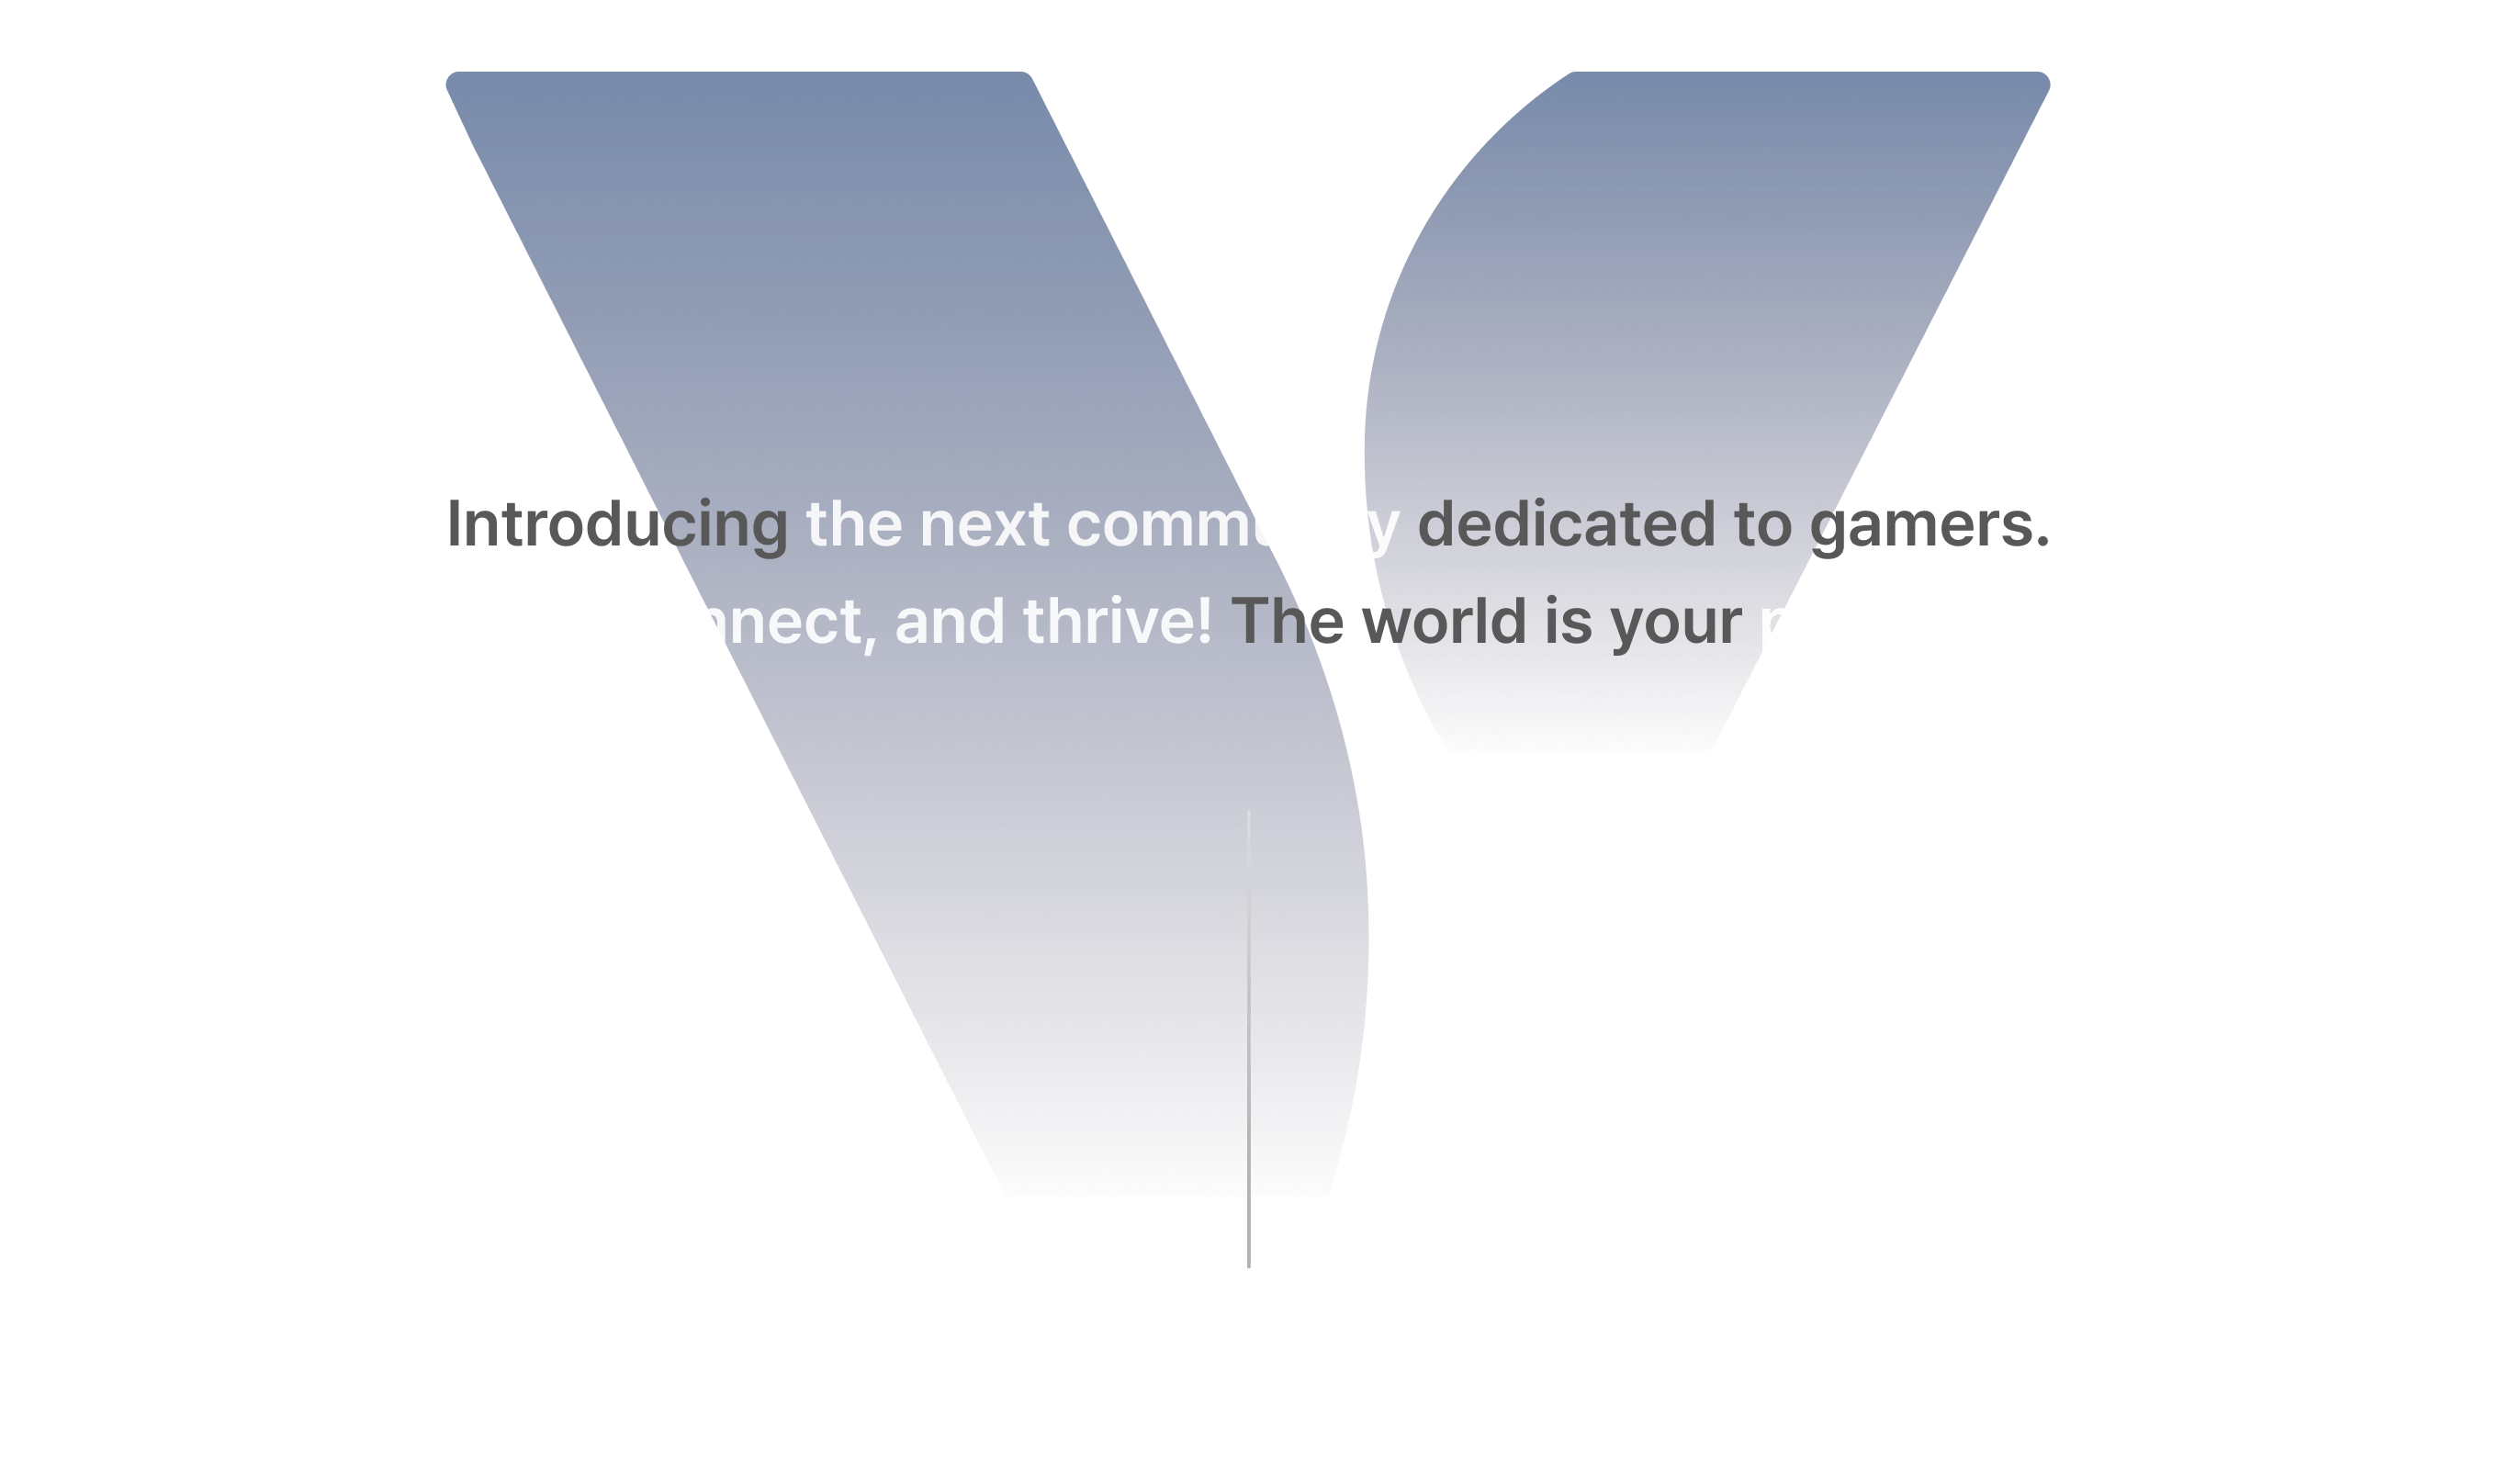 Introducing the next community dedicated to gamers. Gather, connect, and thrive! The world is your playground.